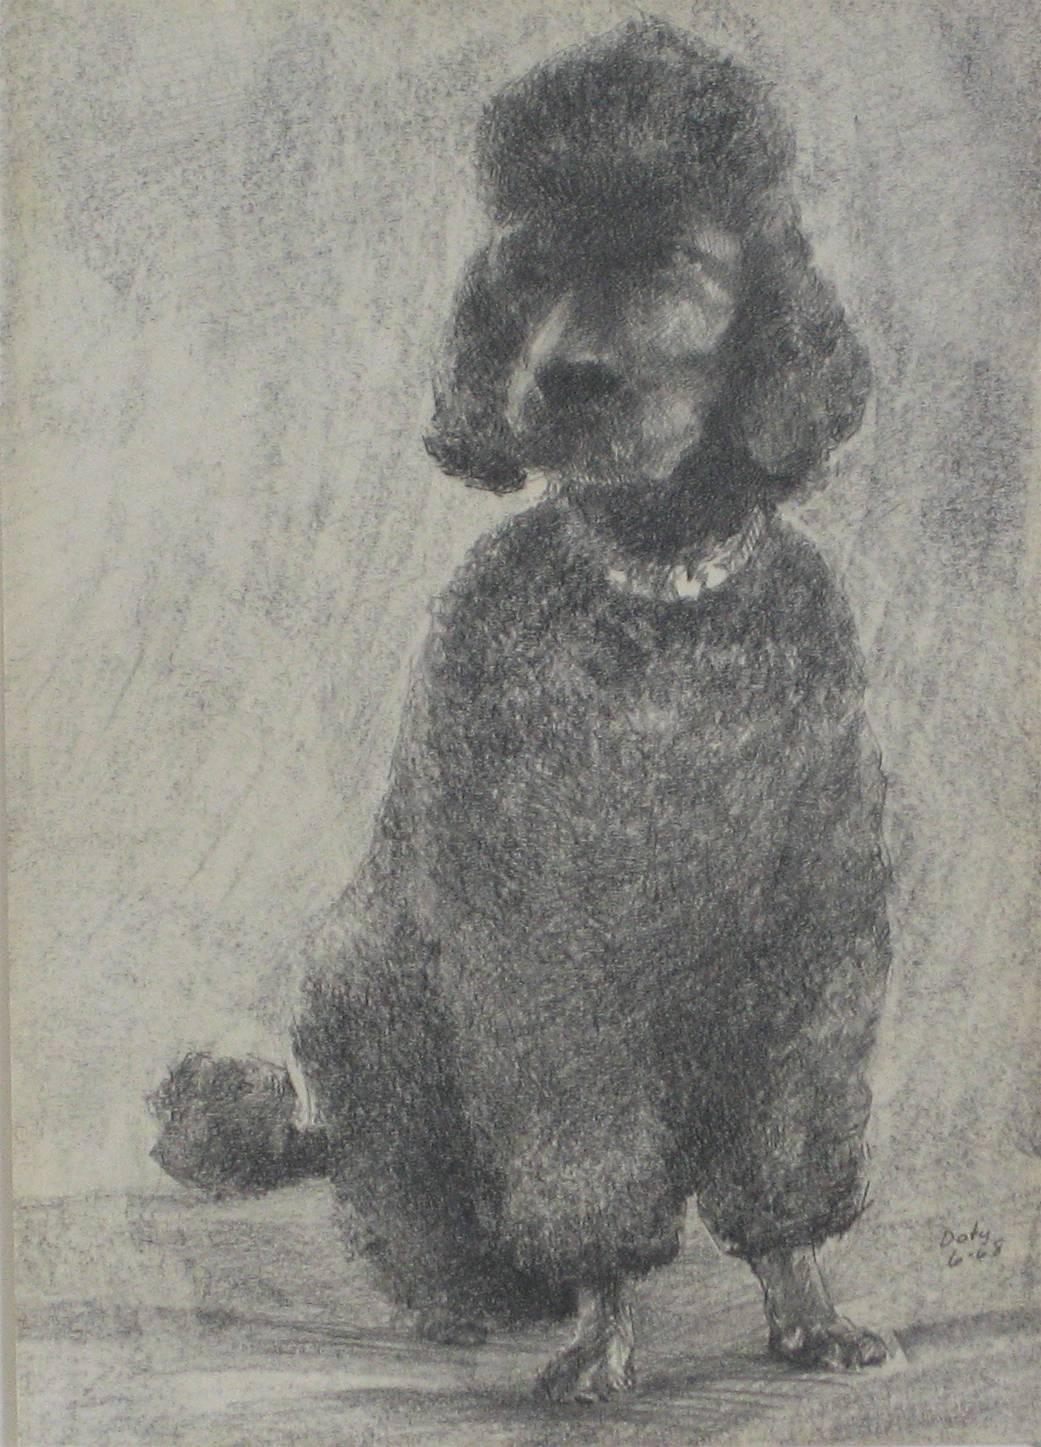 Portrait of a Black Poodle in Charcoal, 1968 - Art by Neal Doty